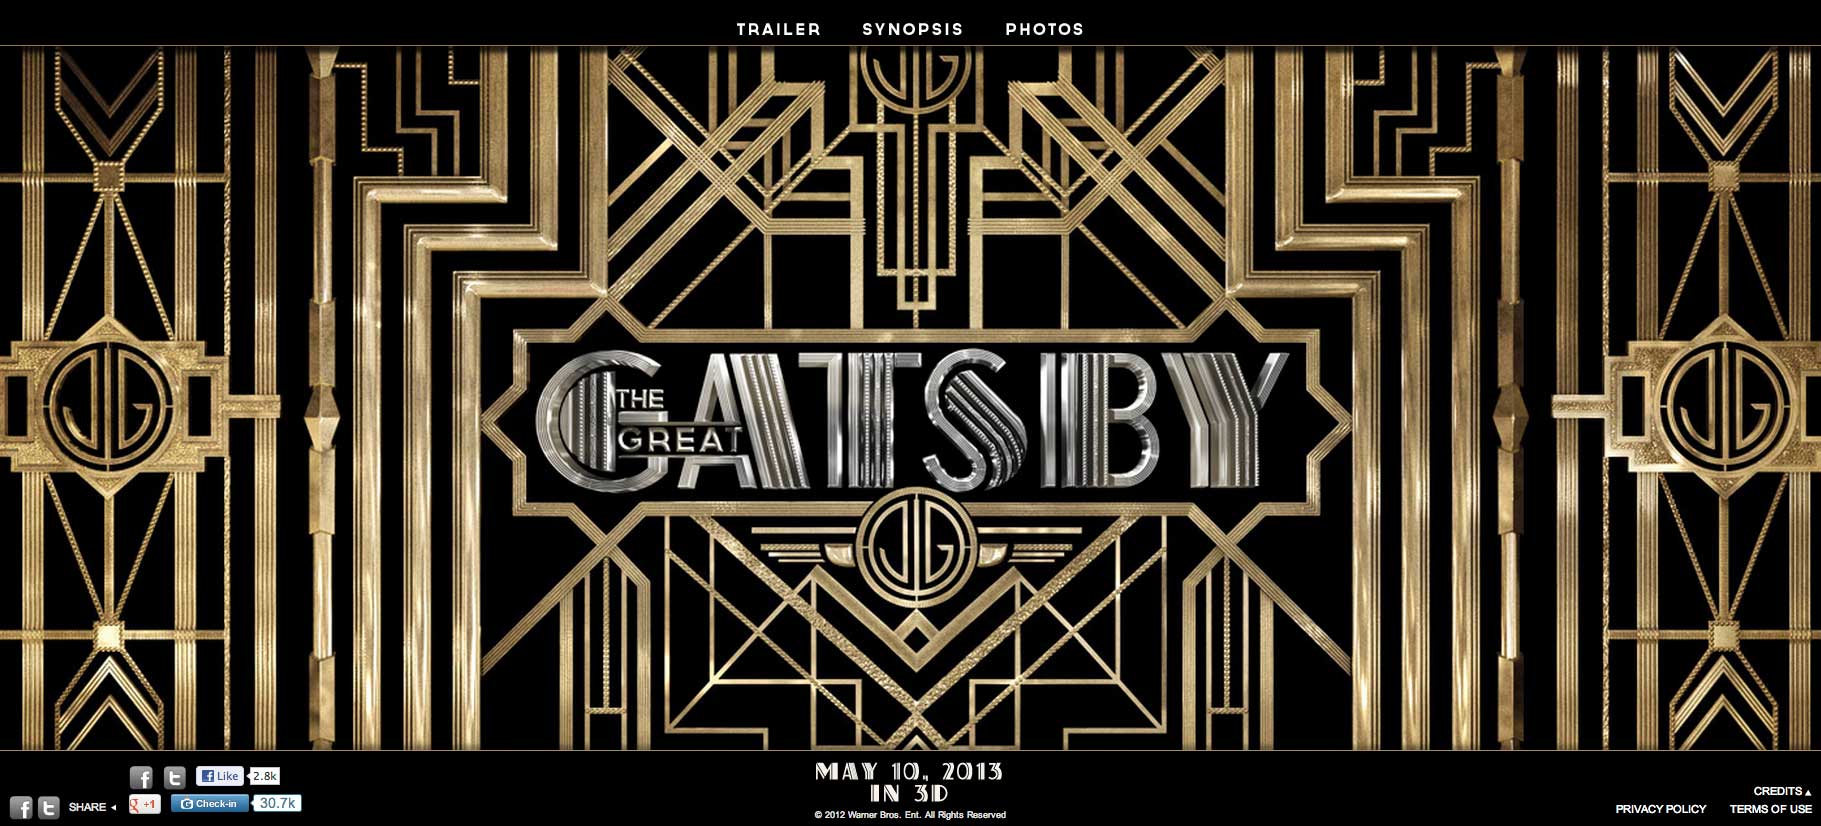 The Great Gatsby free downloads